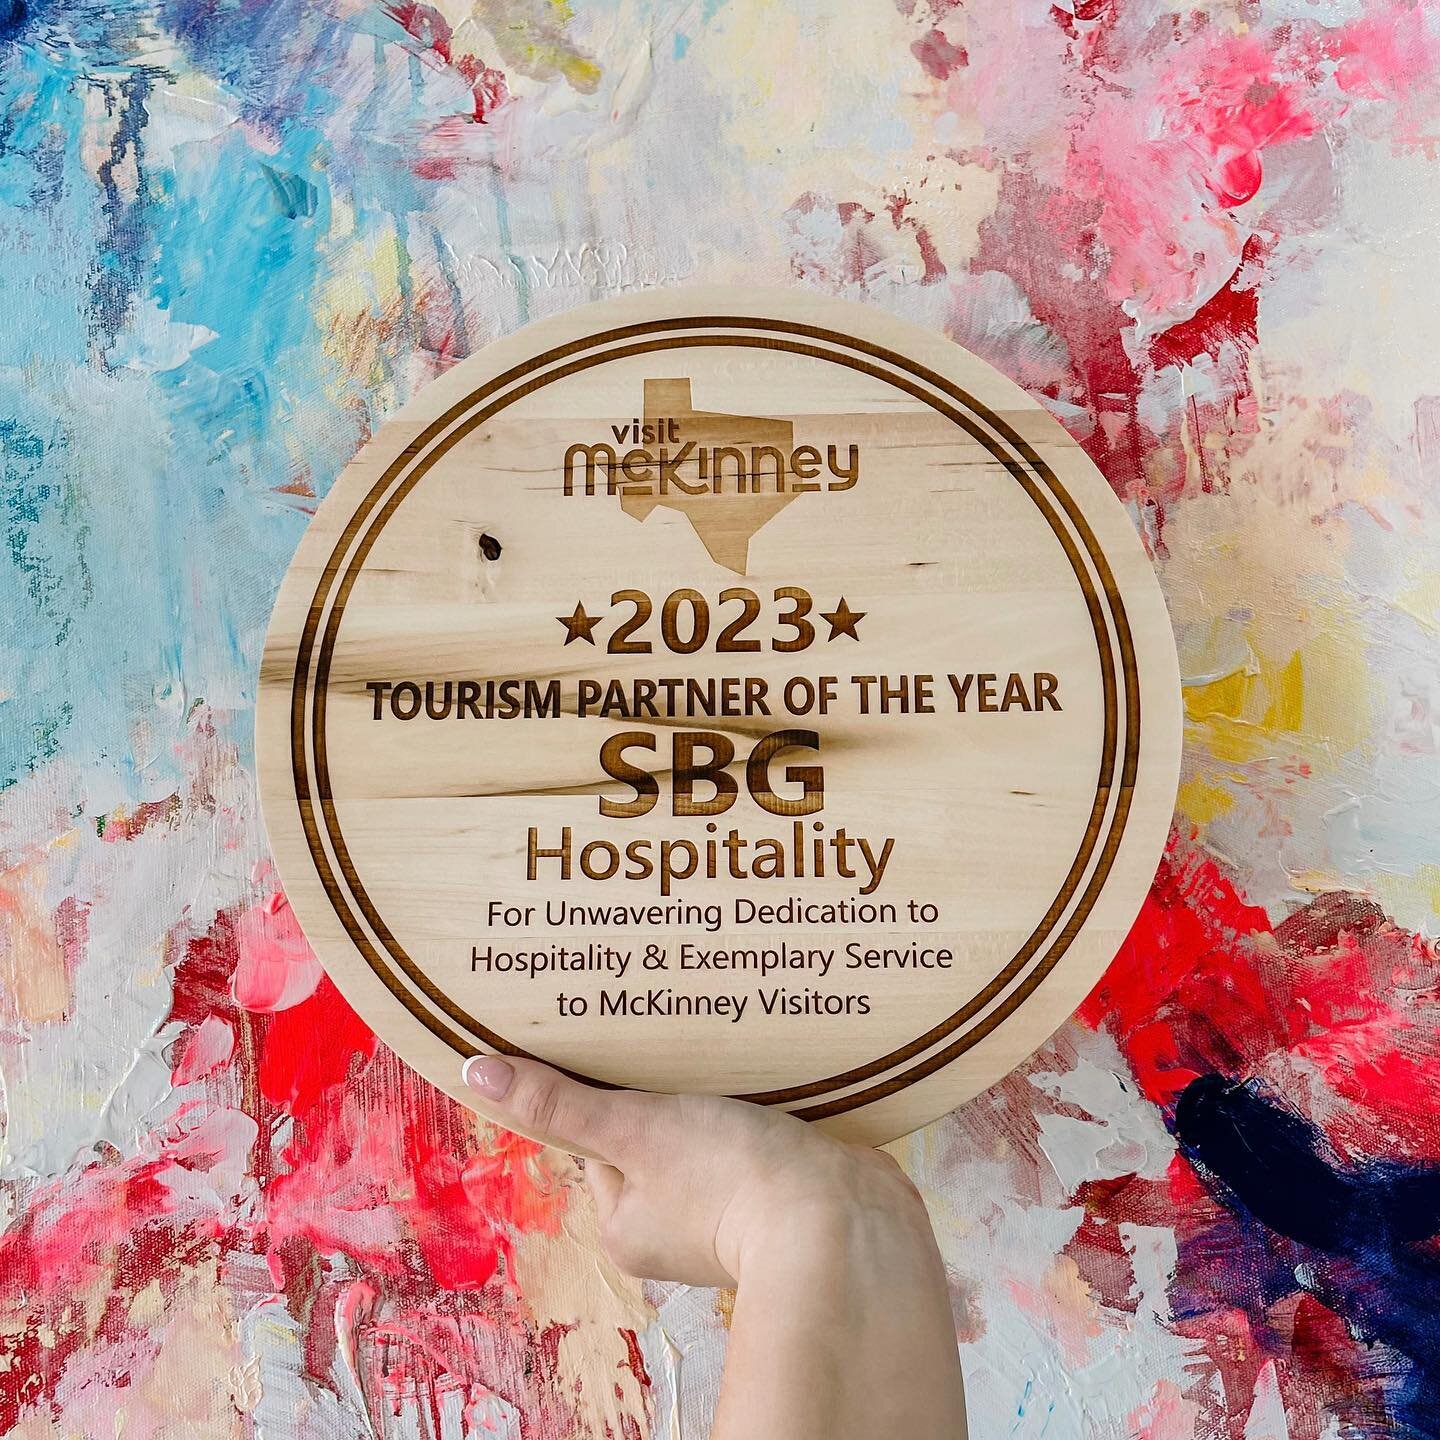 SBG Hospitality was recently awarded the 2023 Visit Mckinney Tourism Partner of the Year! Thank you @visitmckinneytx for this honor! 💕🍍